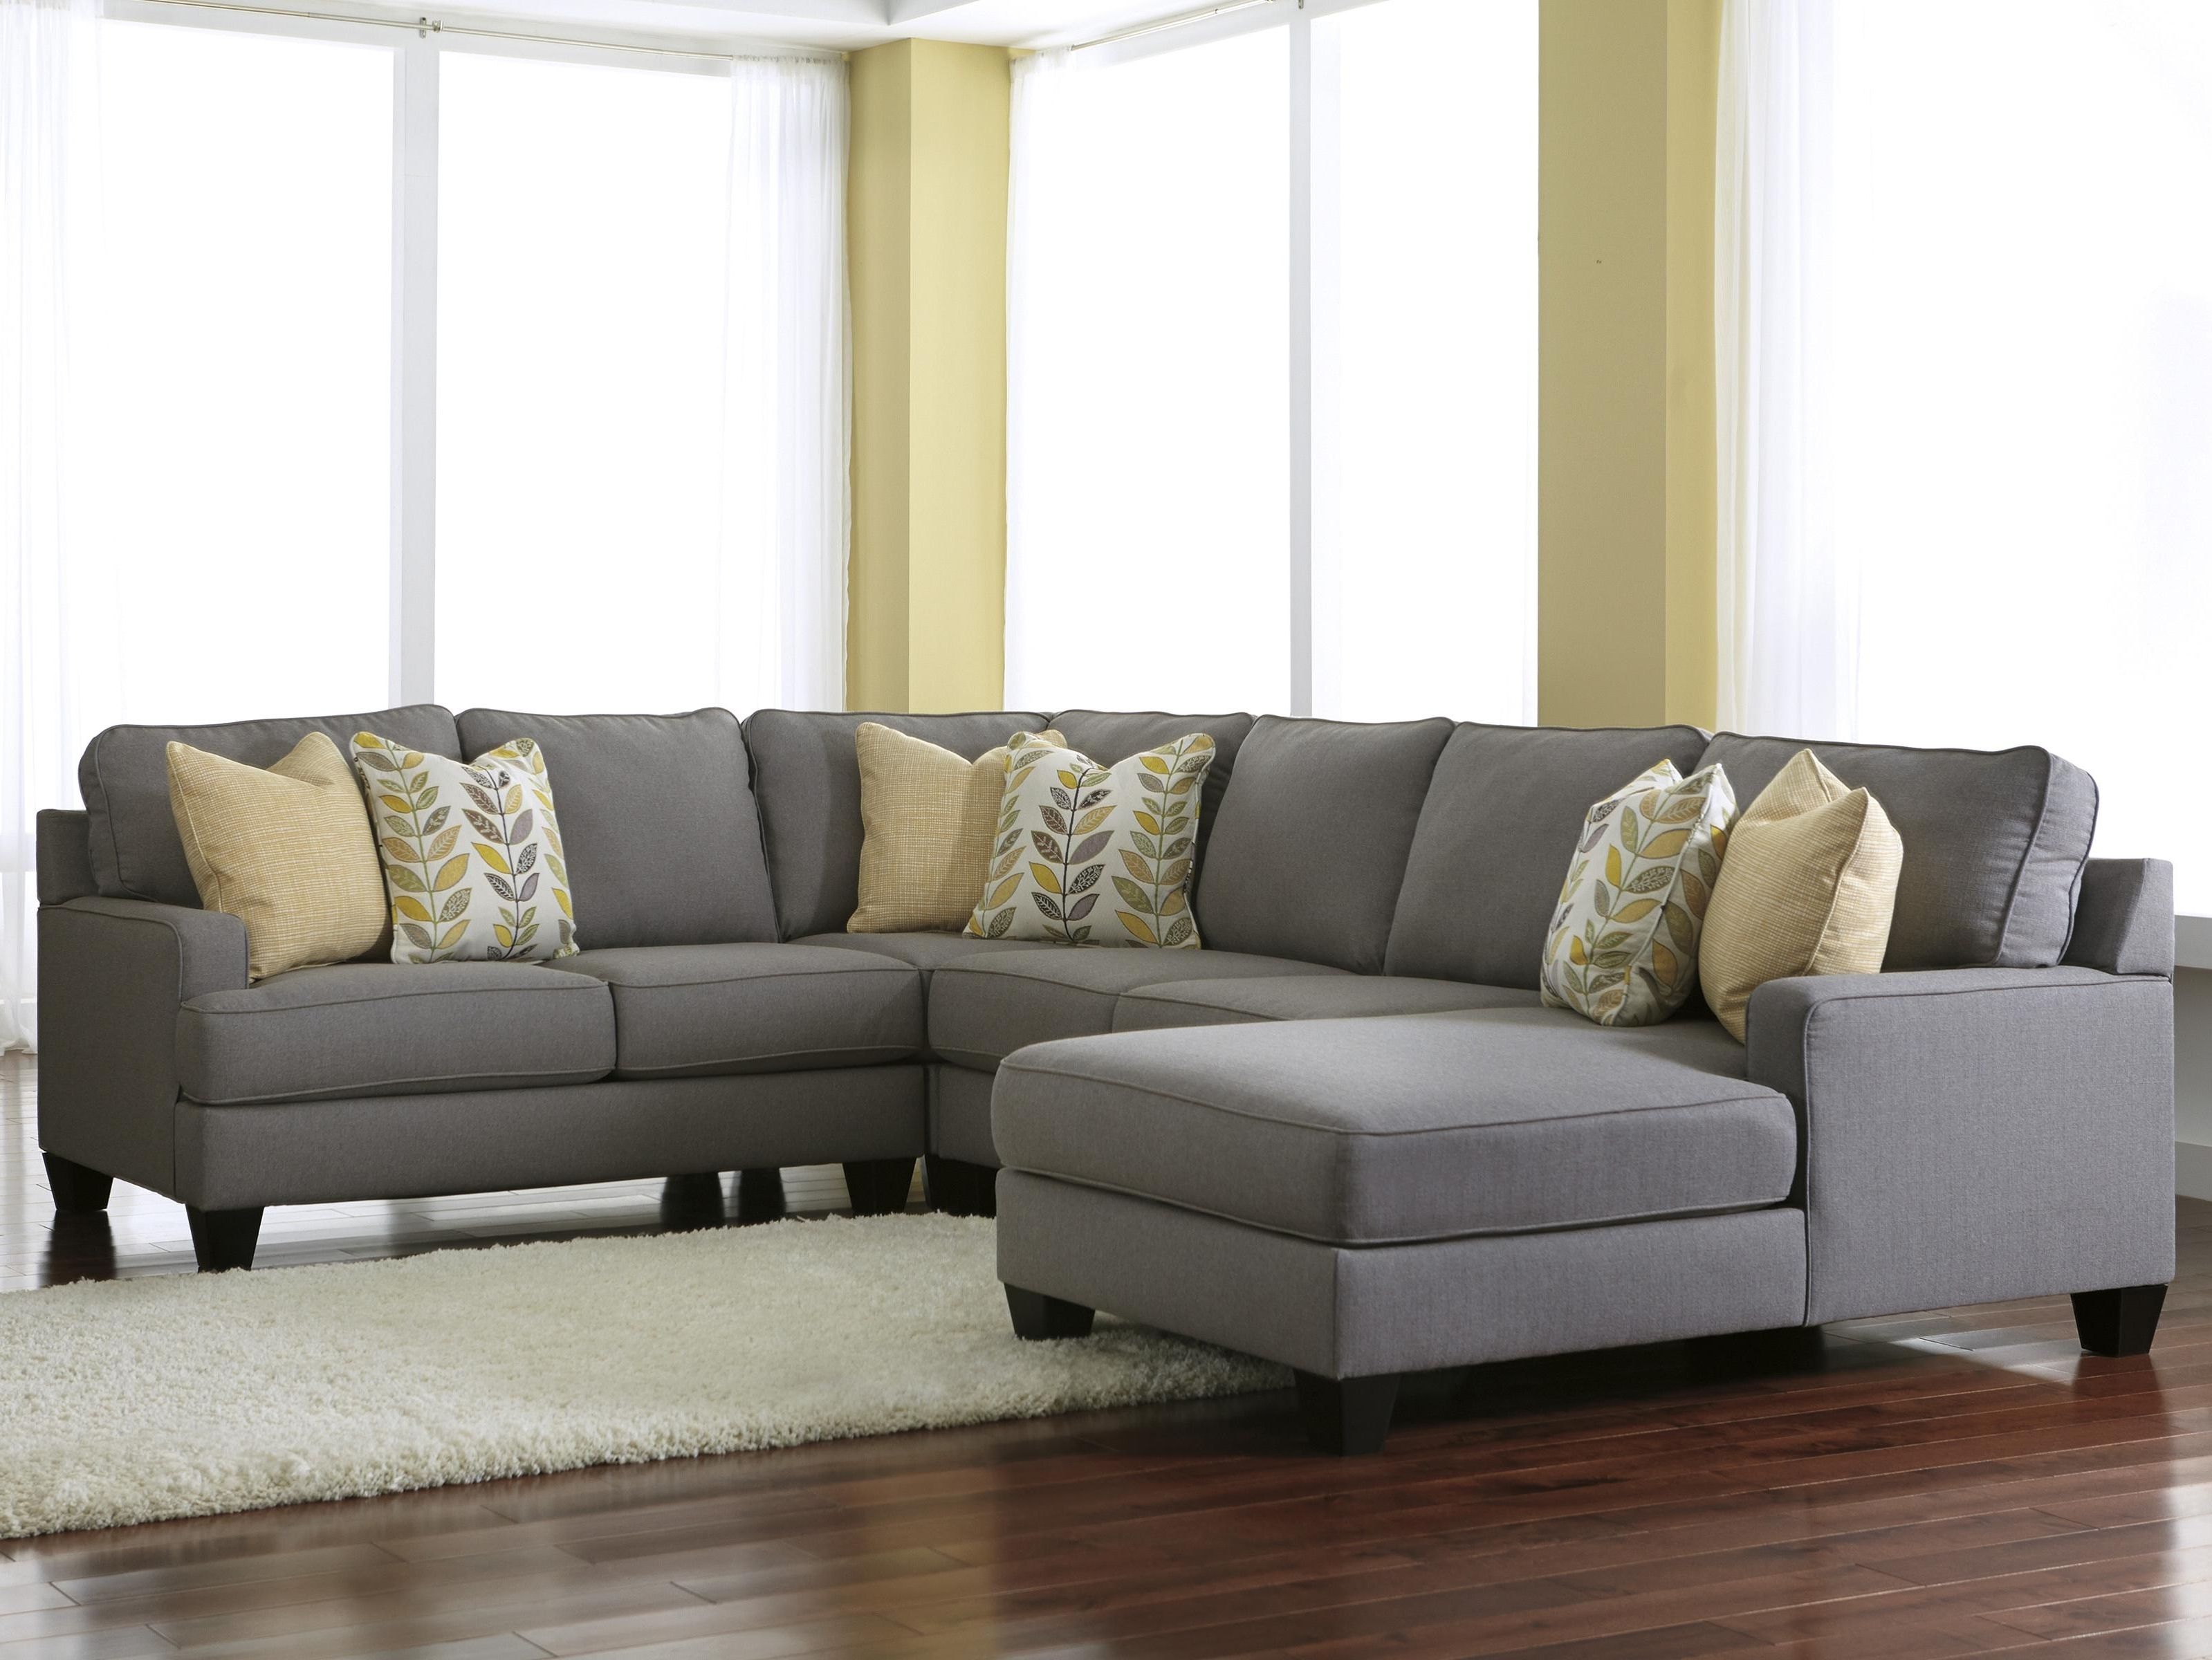 2018 Grey Chaise Sectionals With Regard To Sofa ~ Comfy Sectional Sofa With Chaise Image Sectional Sofa With (View 14 of 15)